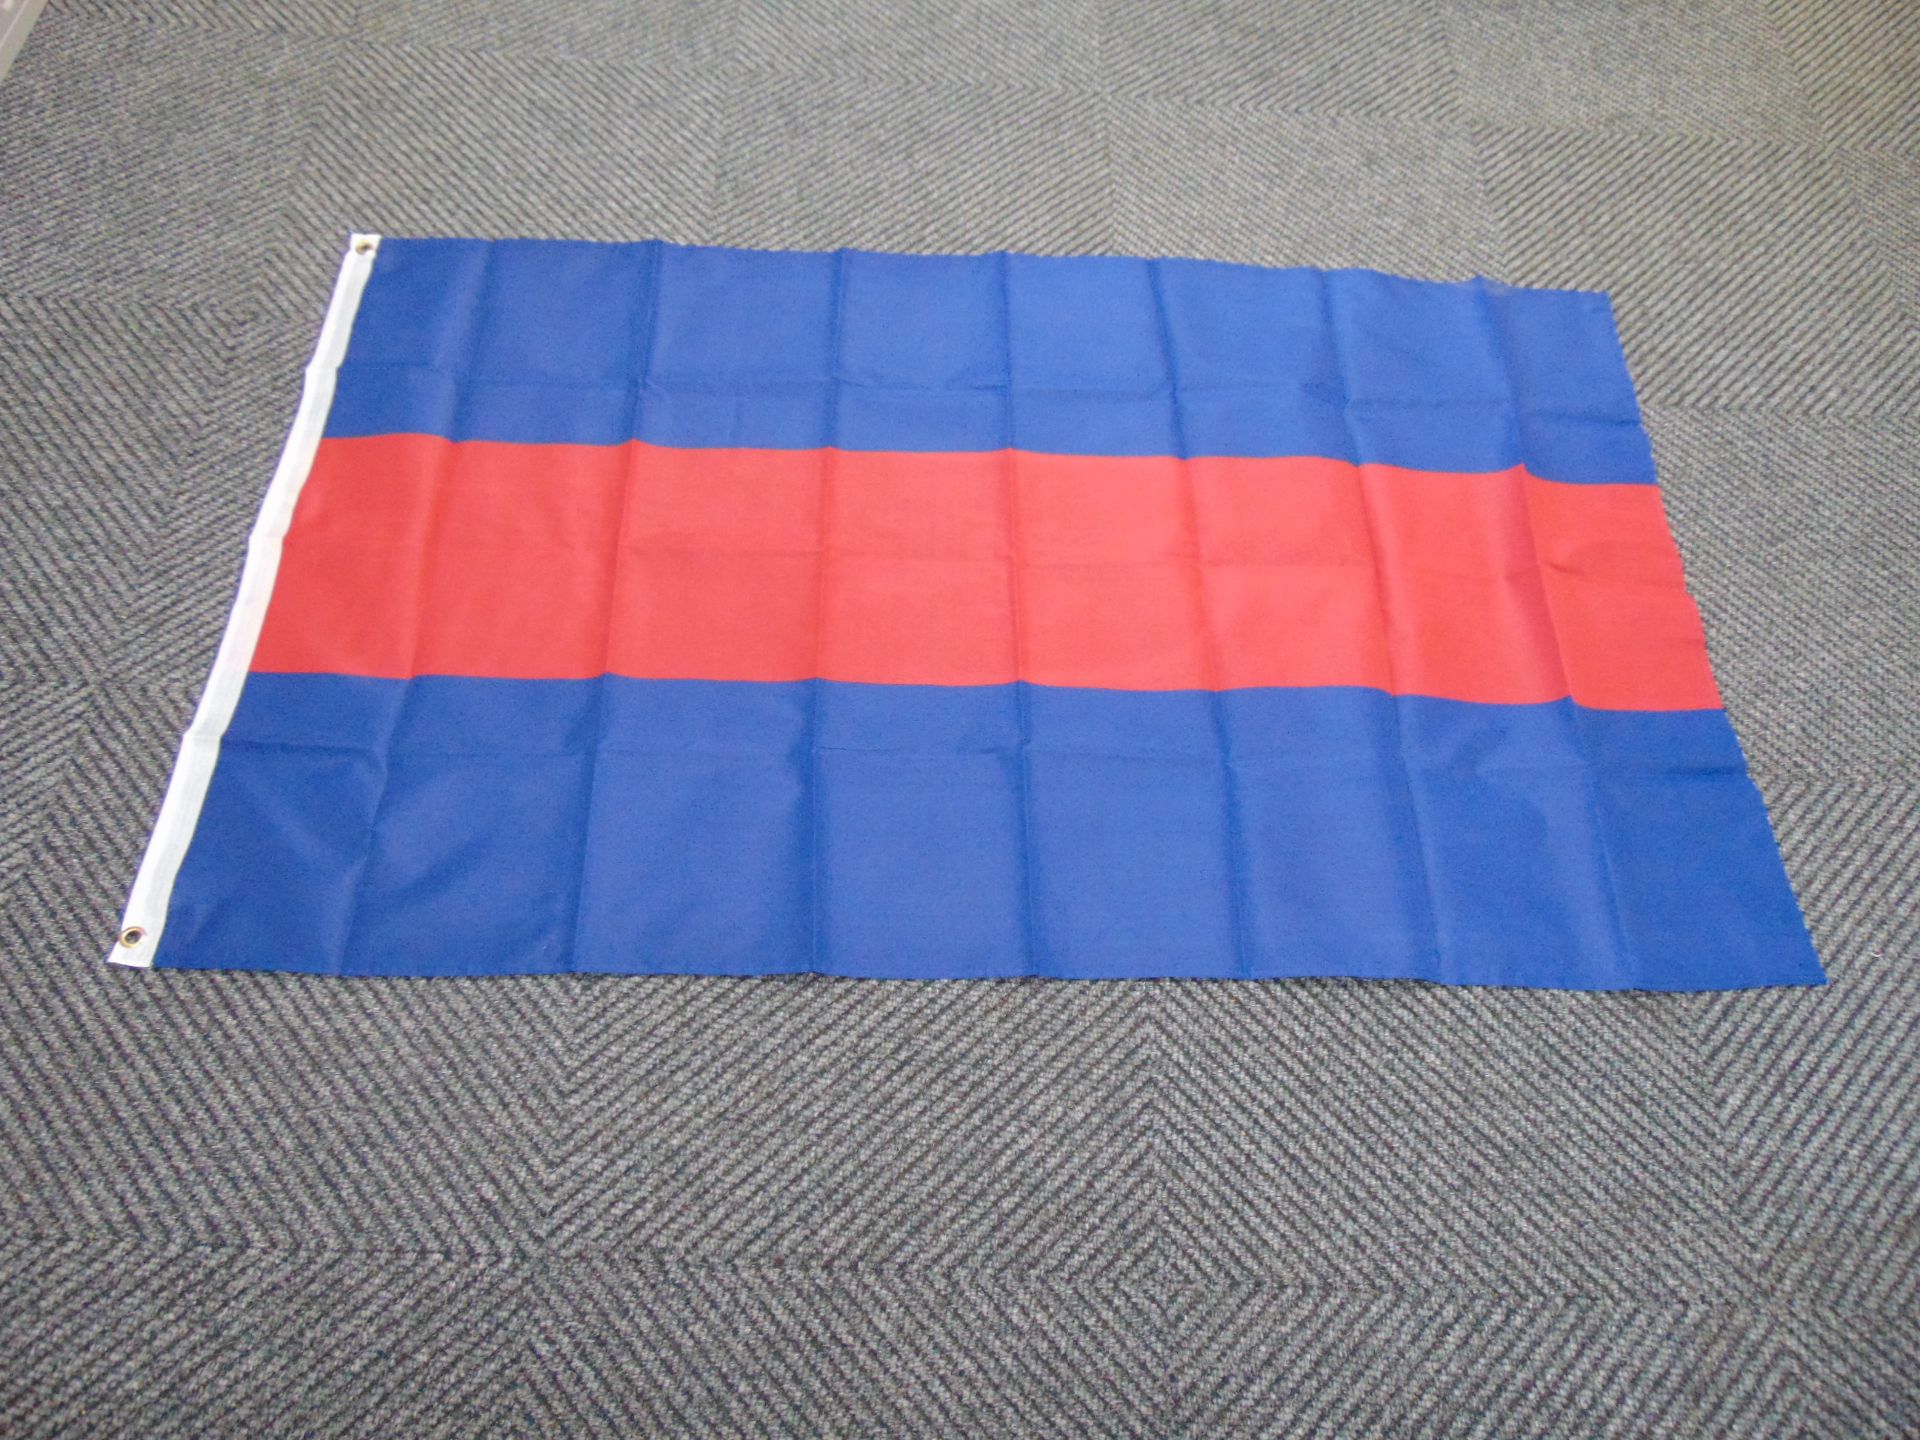 Household Division Flag - 5ft x 3ft with Metal Eyelets. - Image 2 of 4